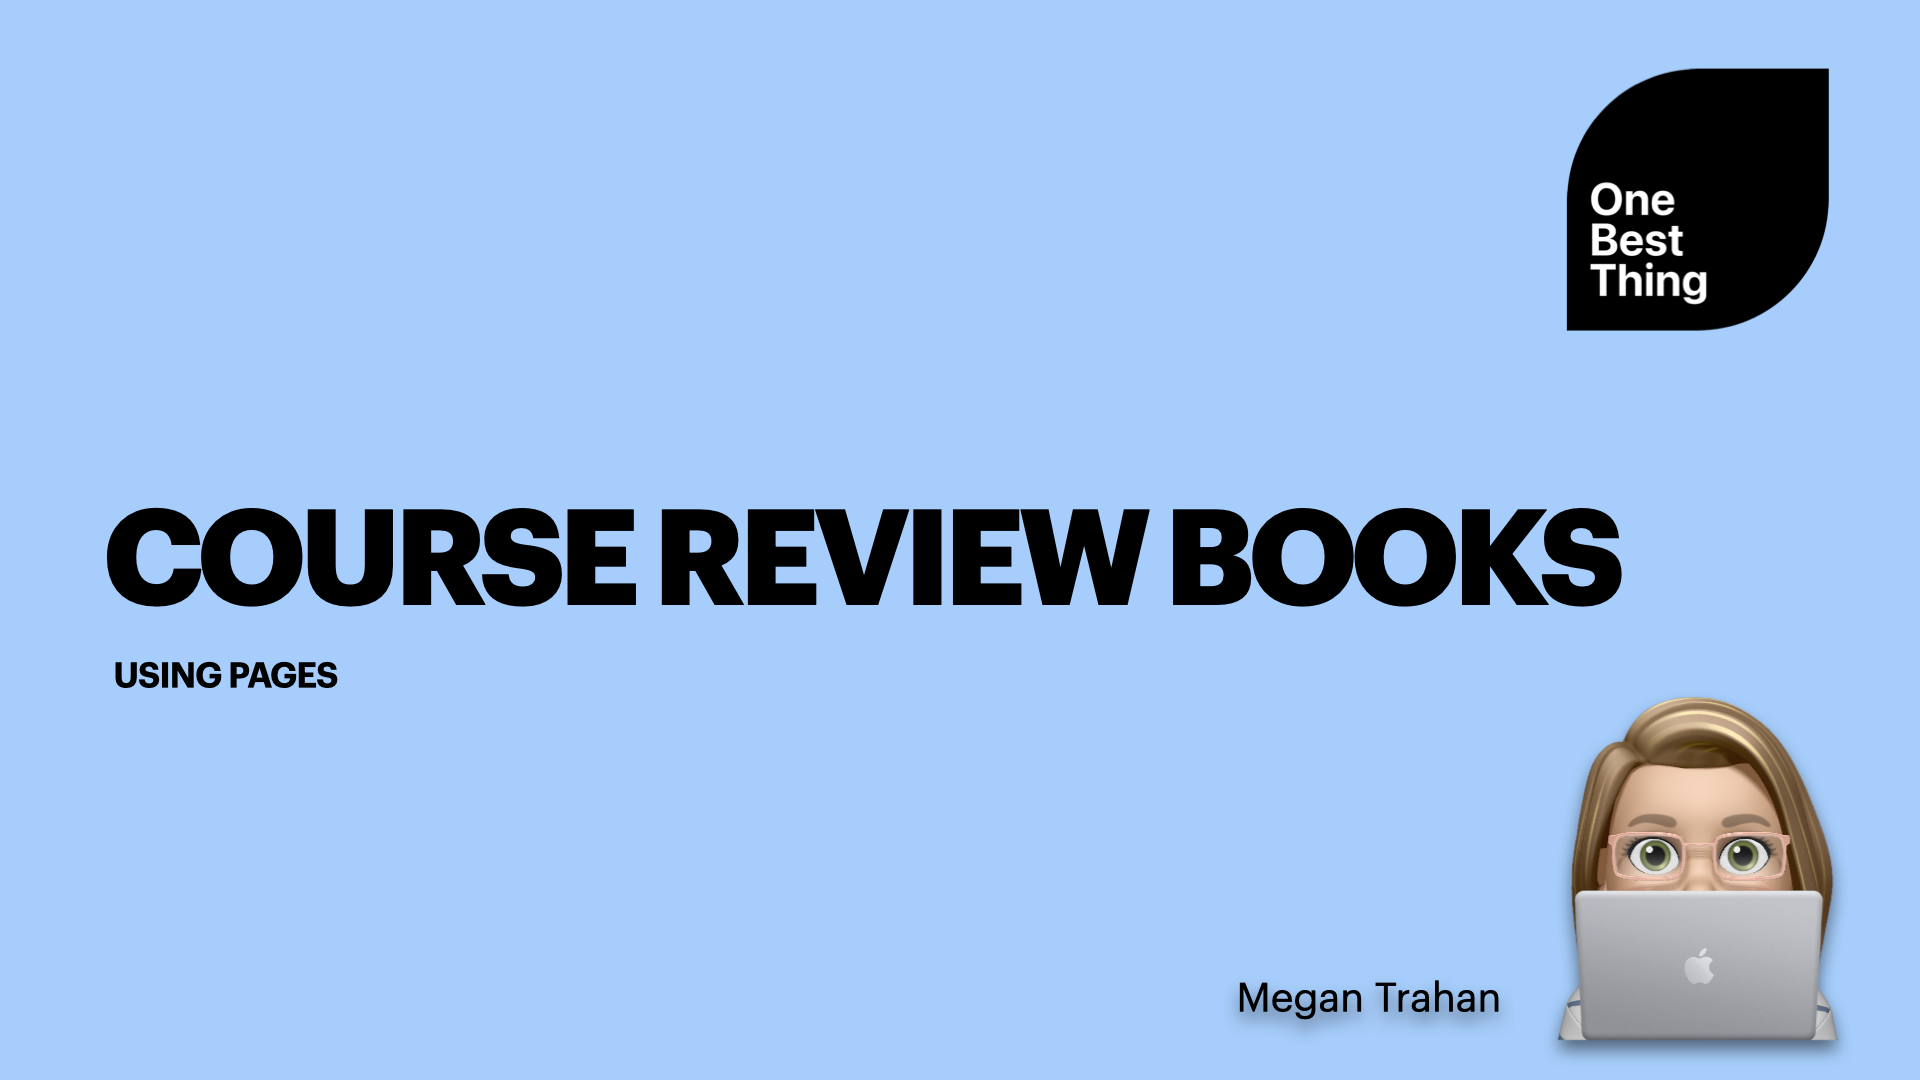 Blue background with the title "Course Review Books Using Pages" and a Memoji of a woman looking at a MacBook